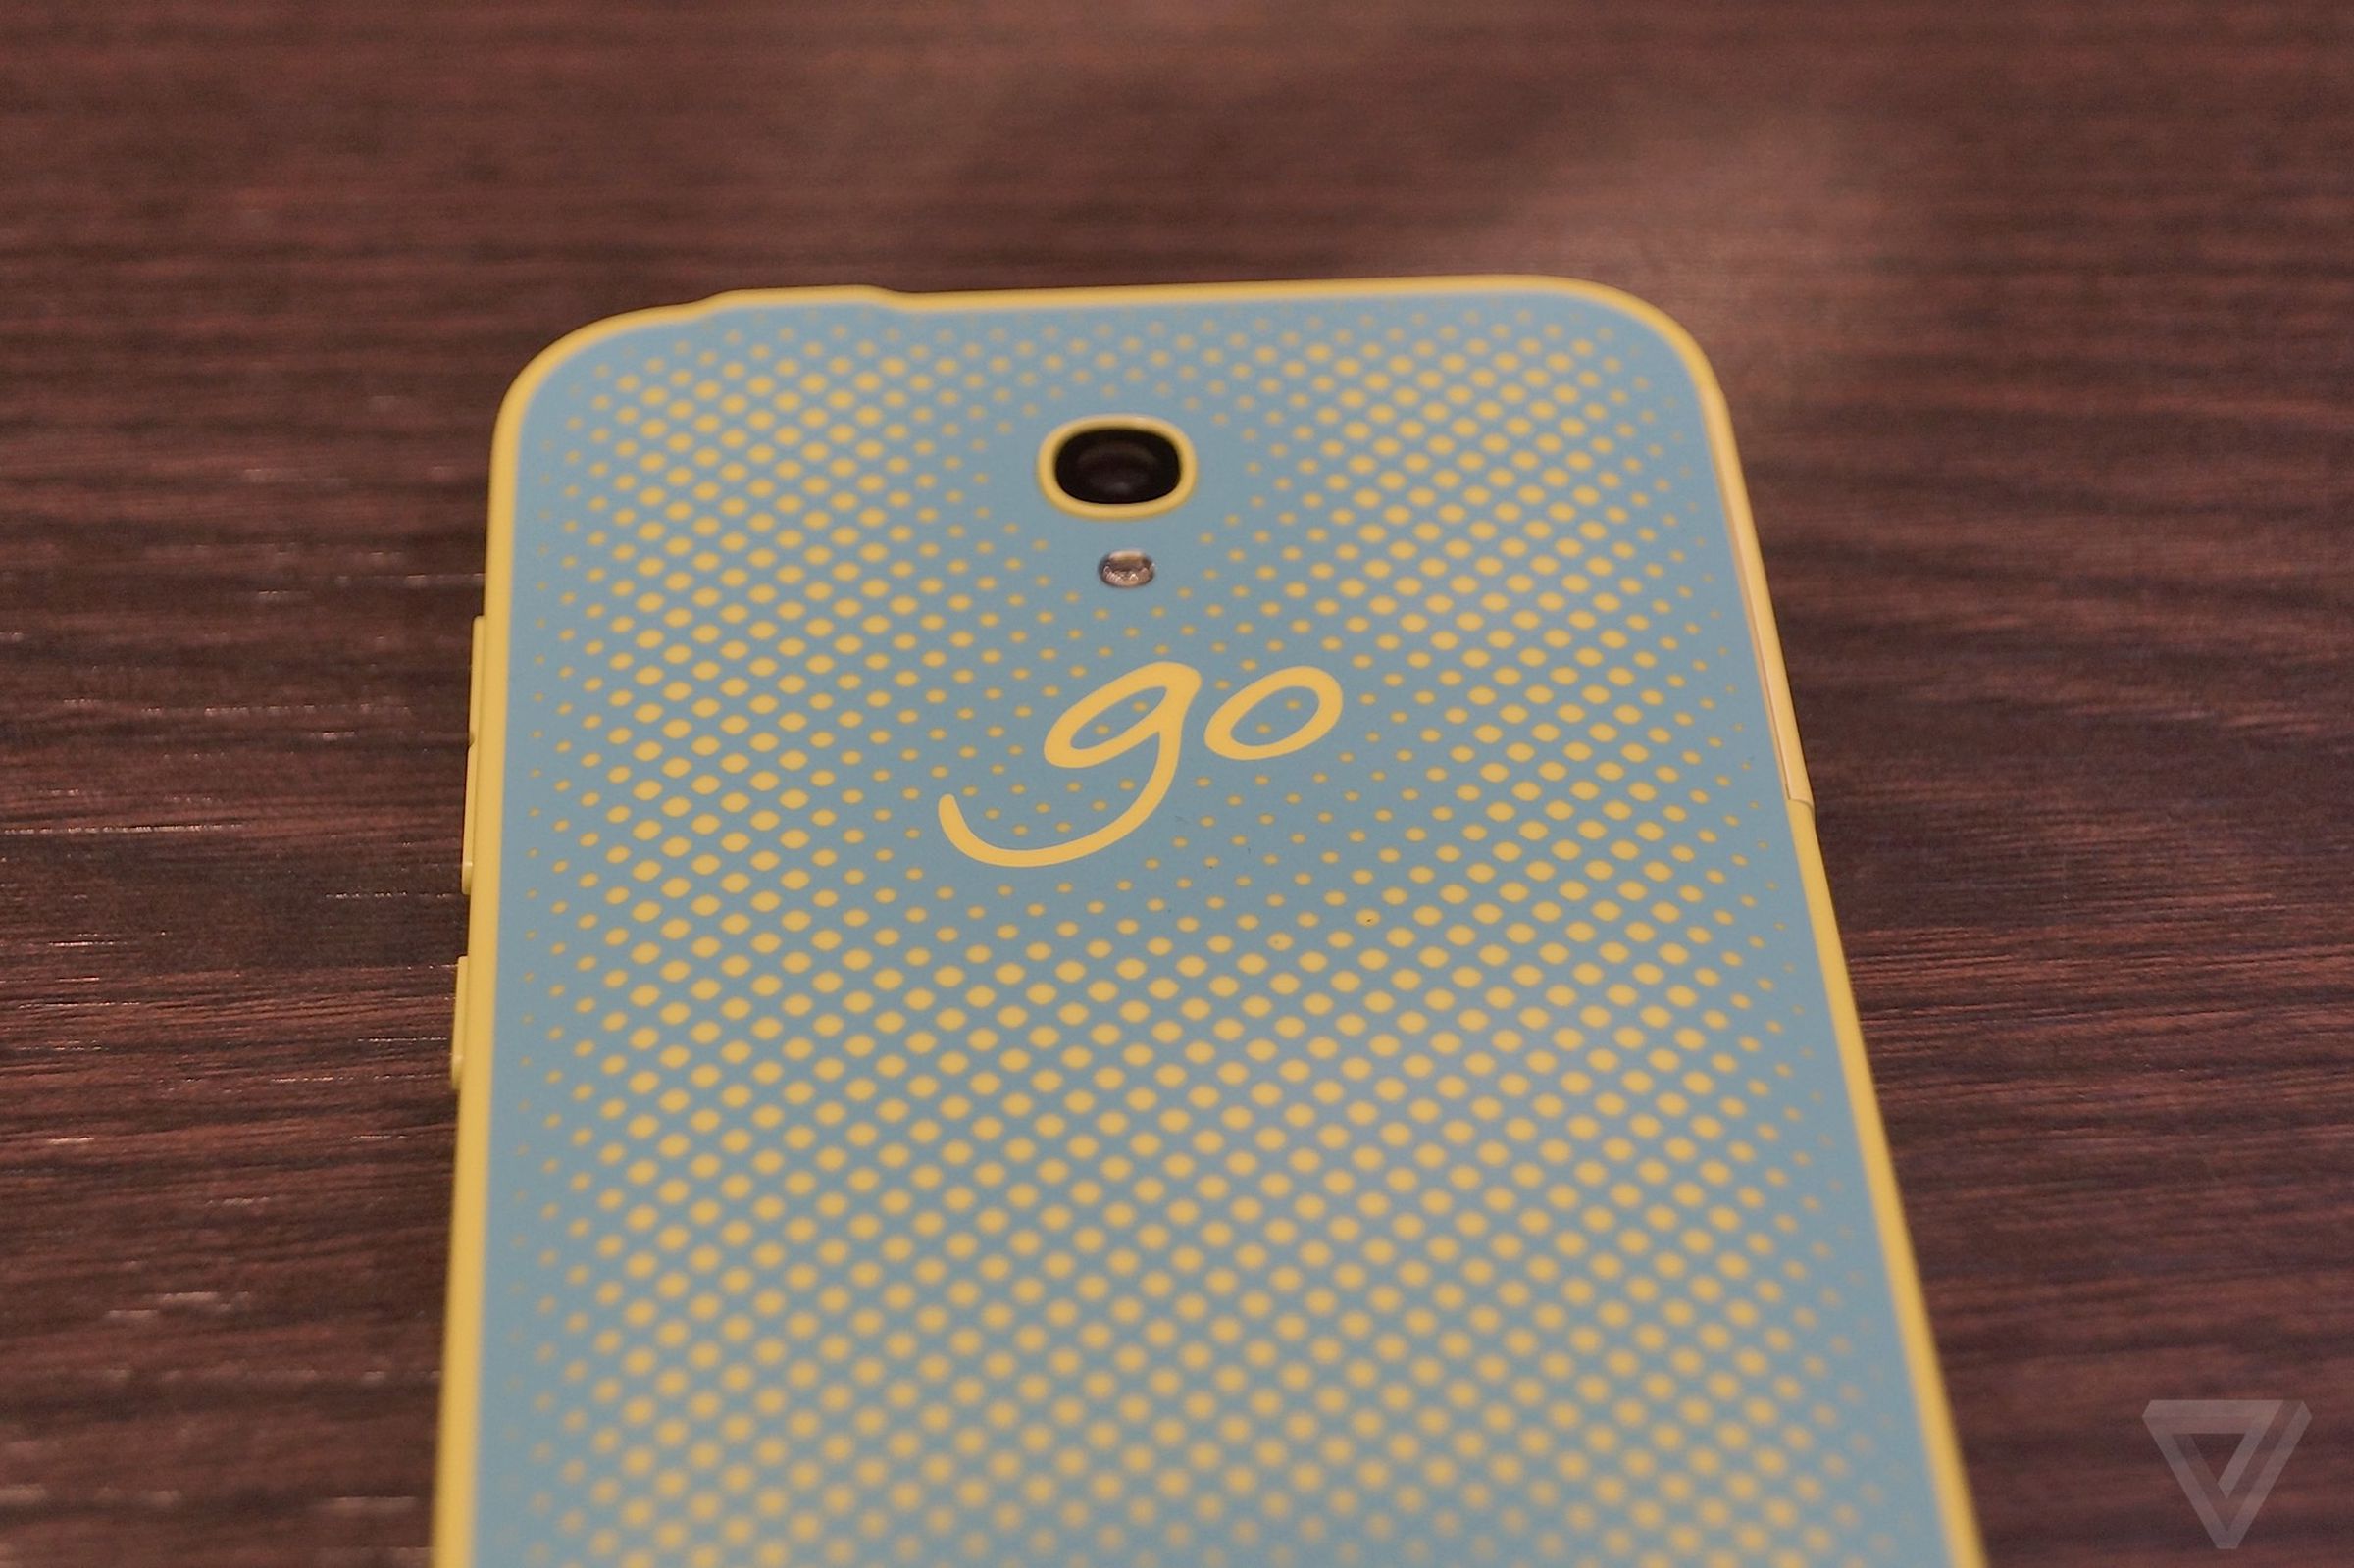 Alcatel's Go Play and Go Watch 